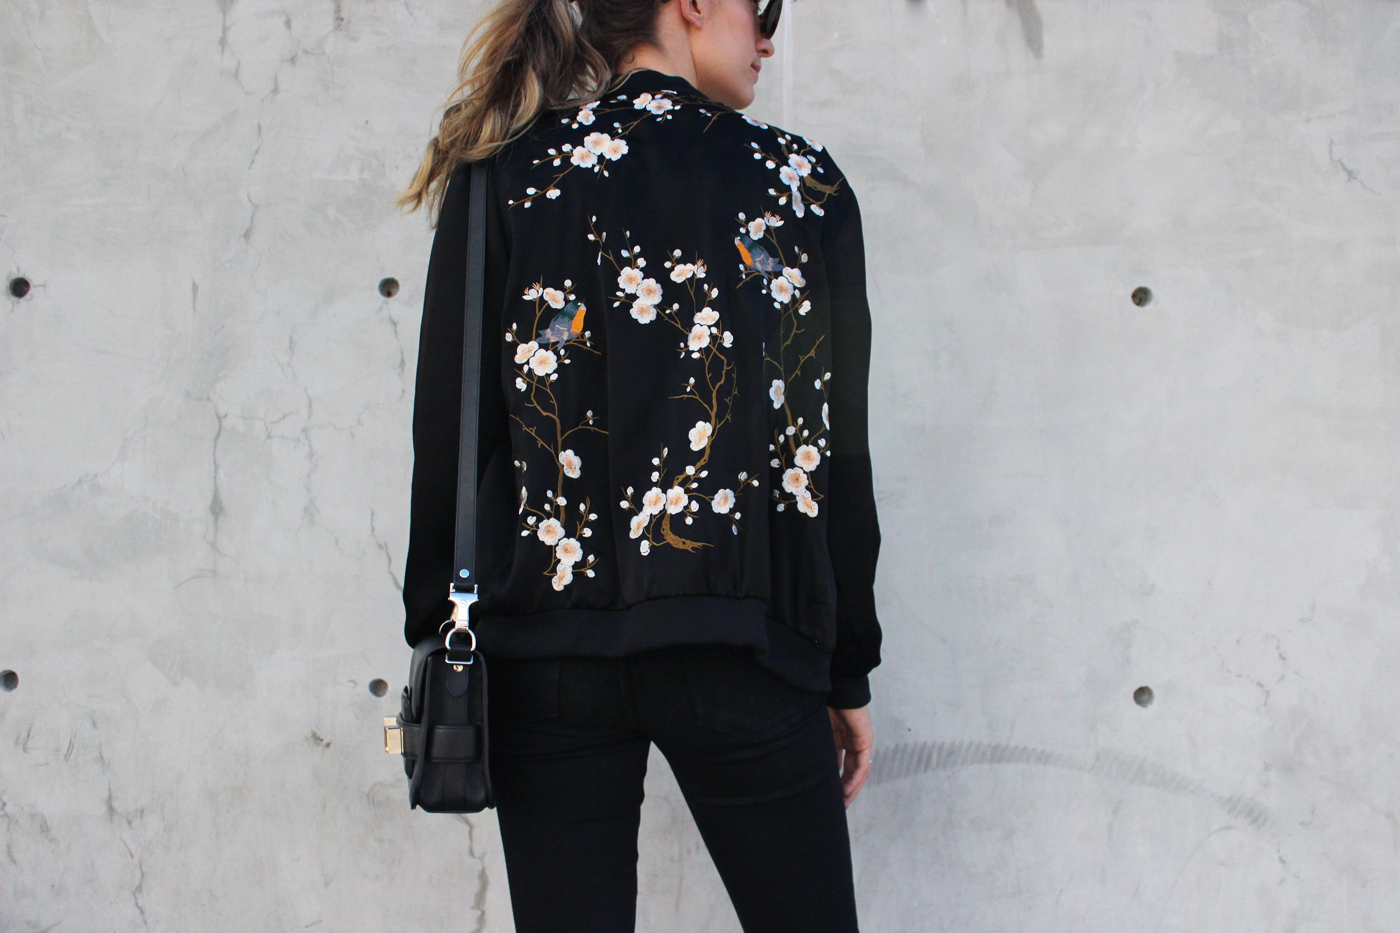 SHARDAY ENGEL - 5 reasons to buy a floral bomber